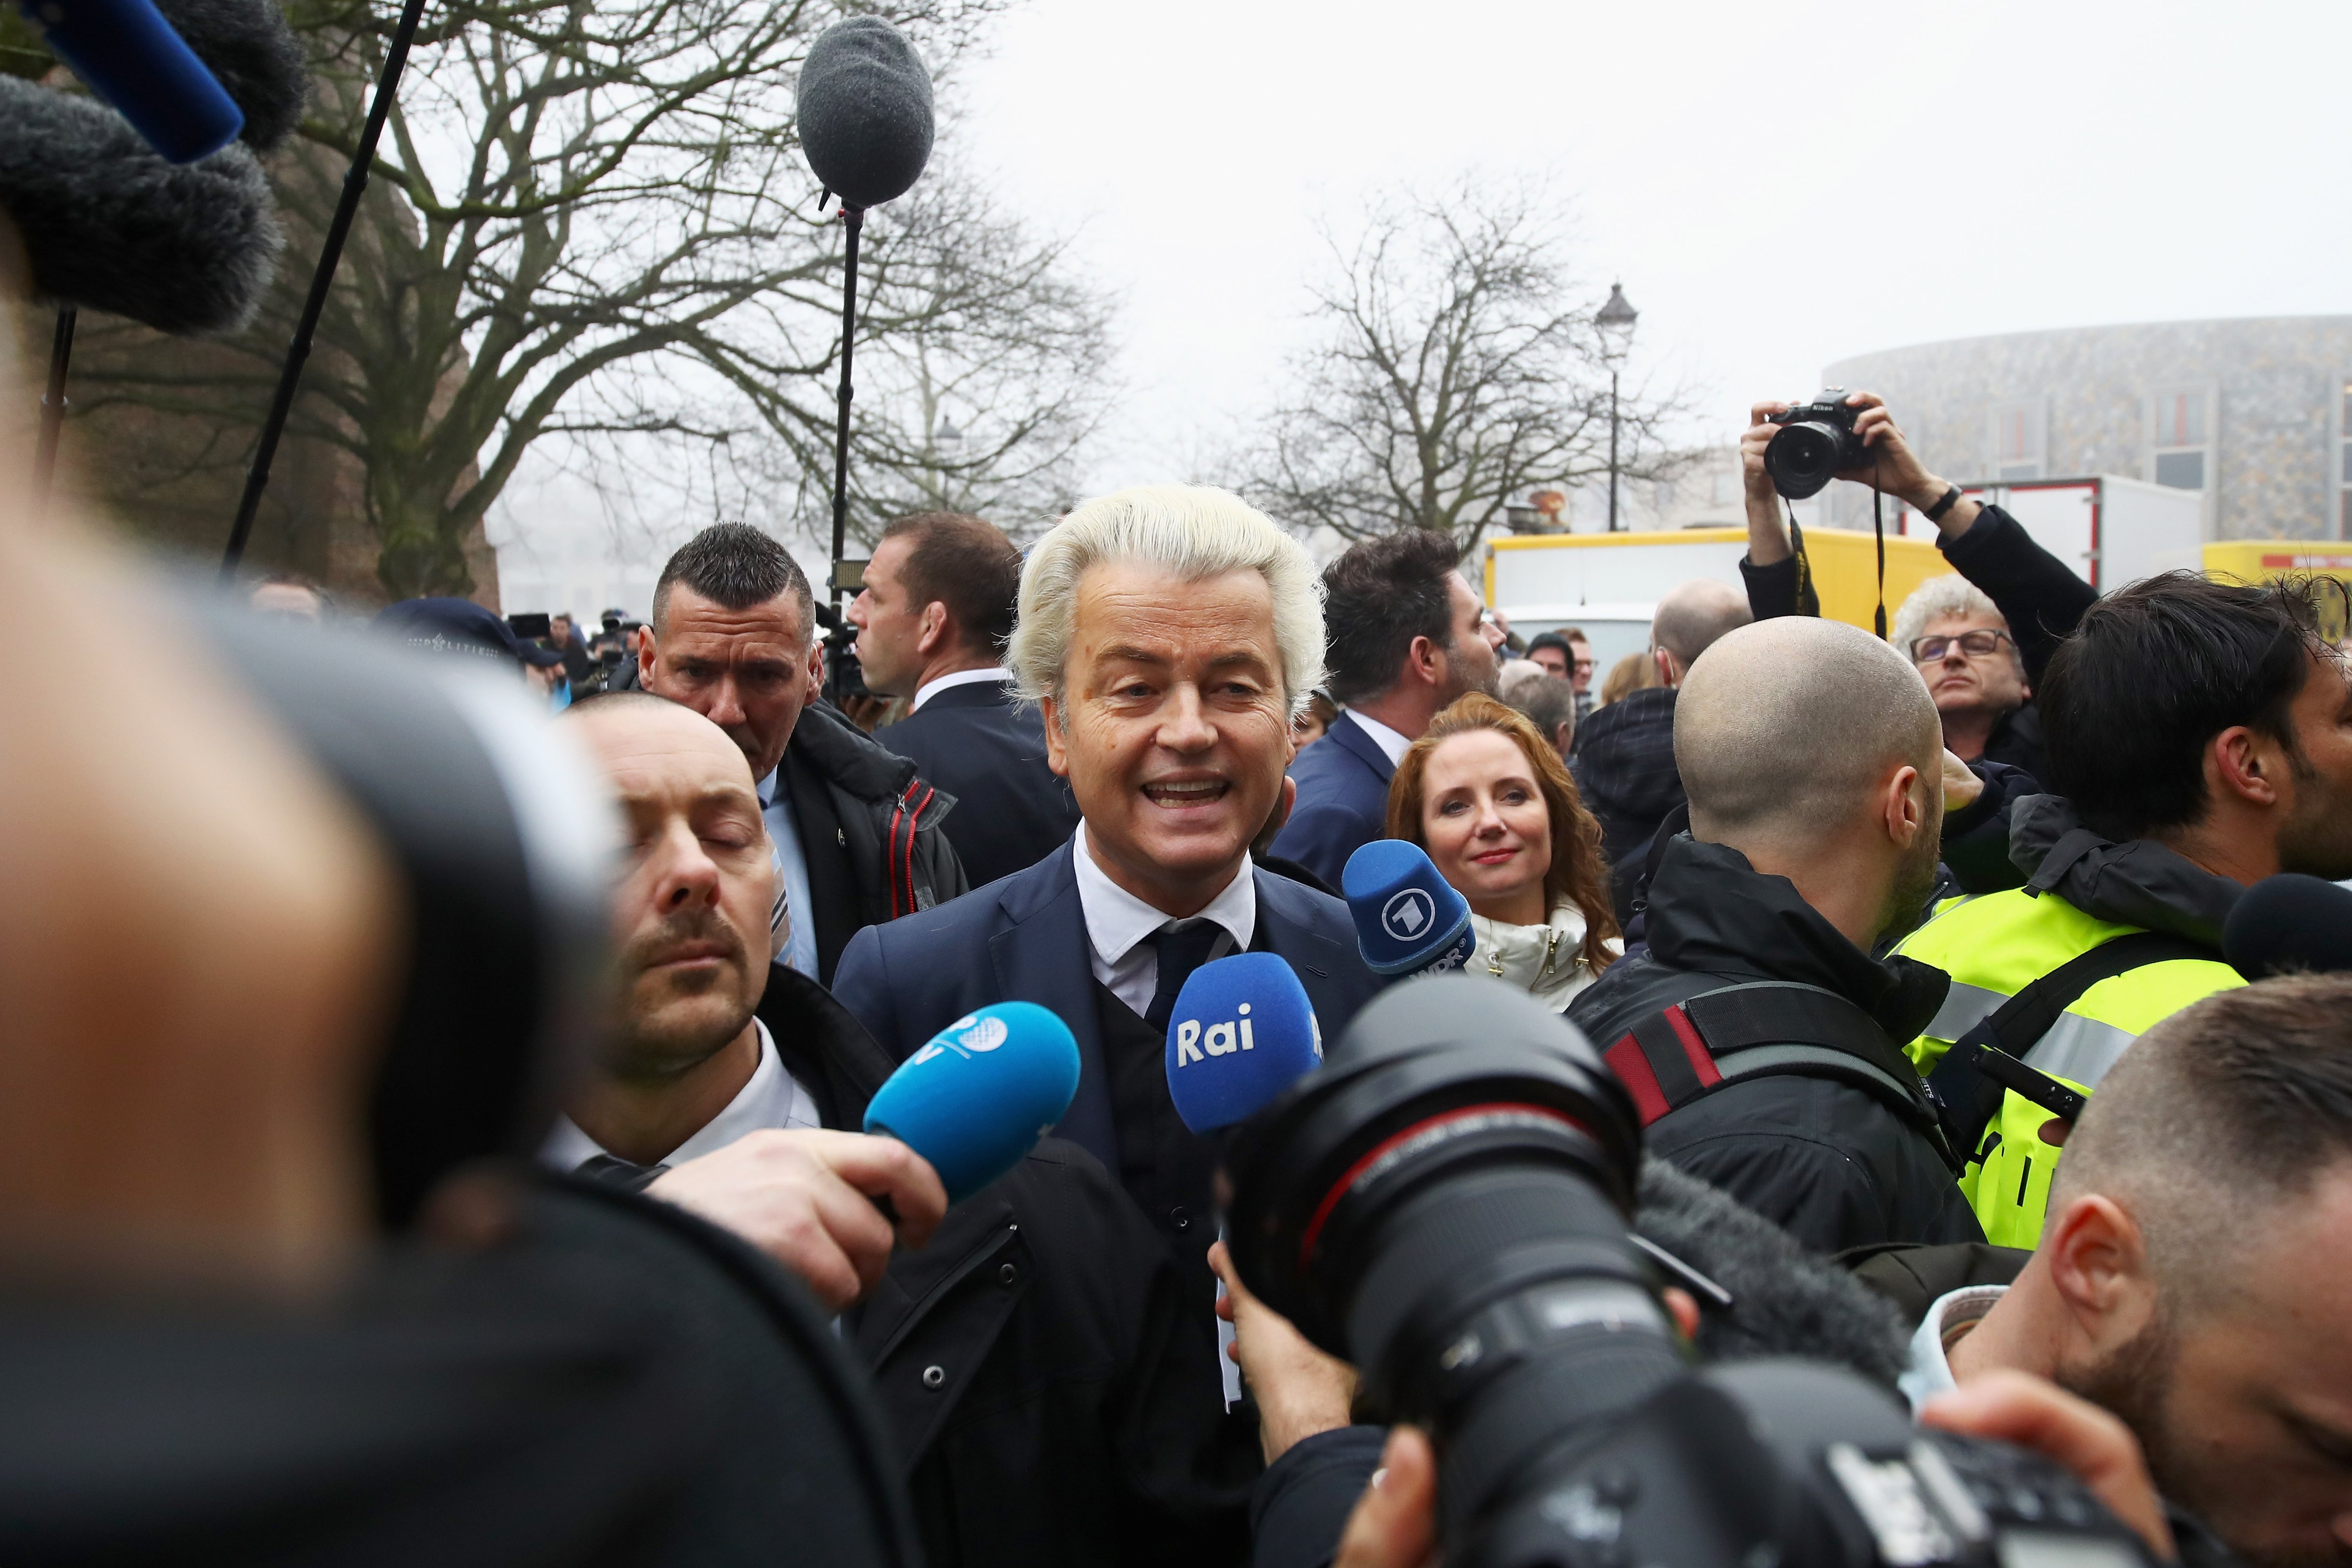 PVV Candidate Geert Wilders Addresses The Crowds At Campaign Rally